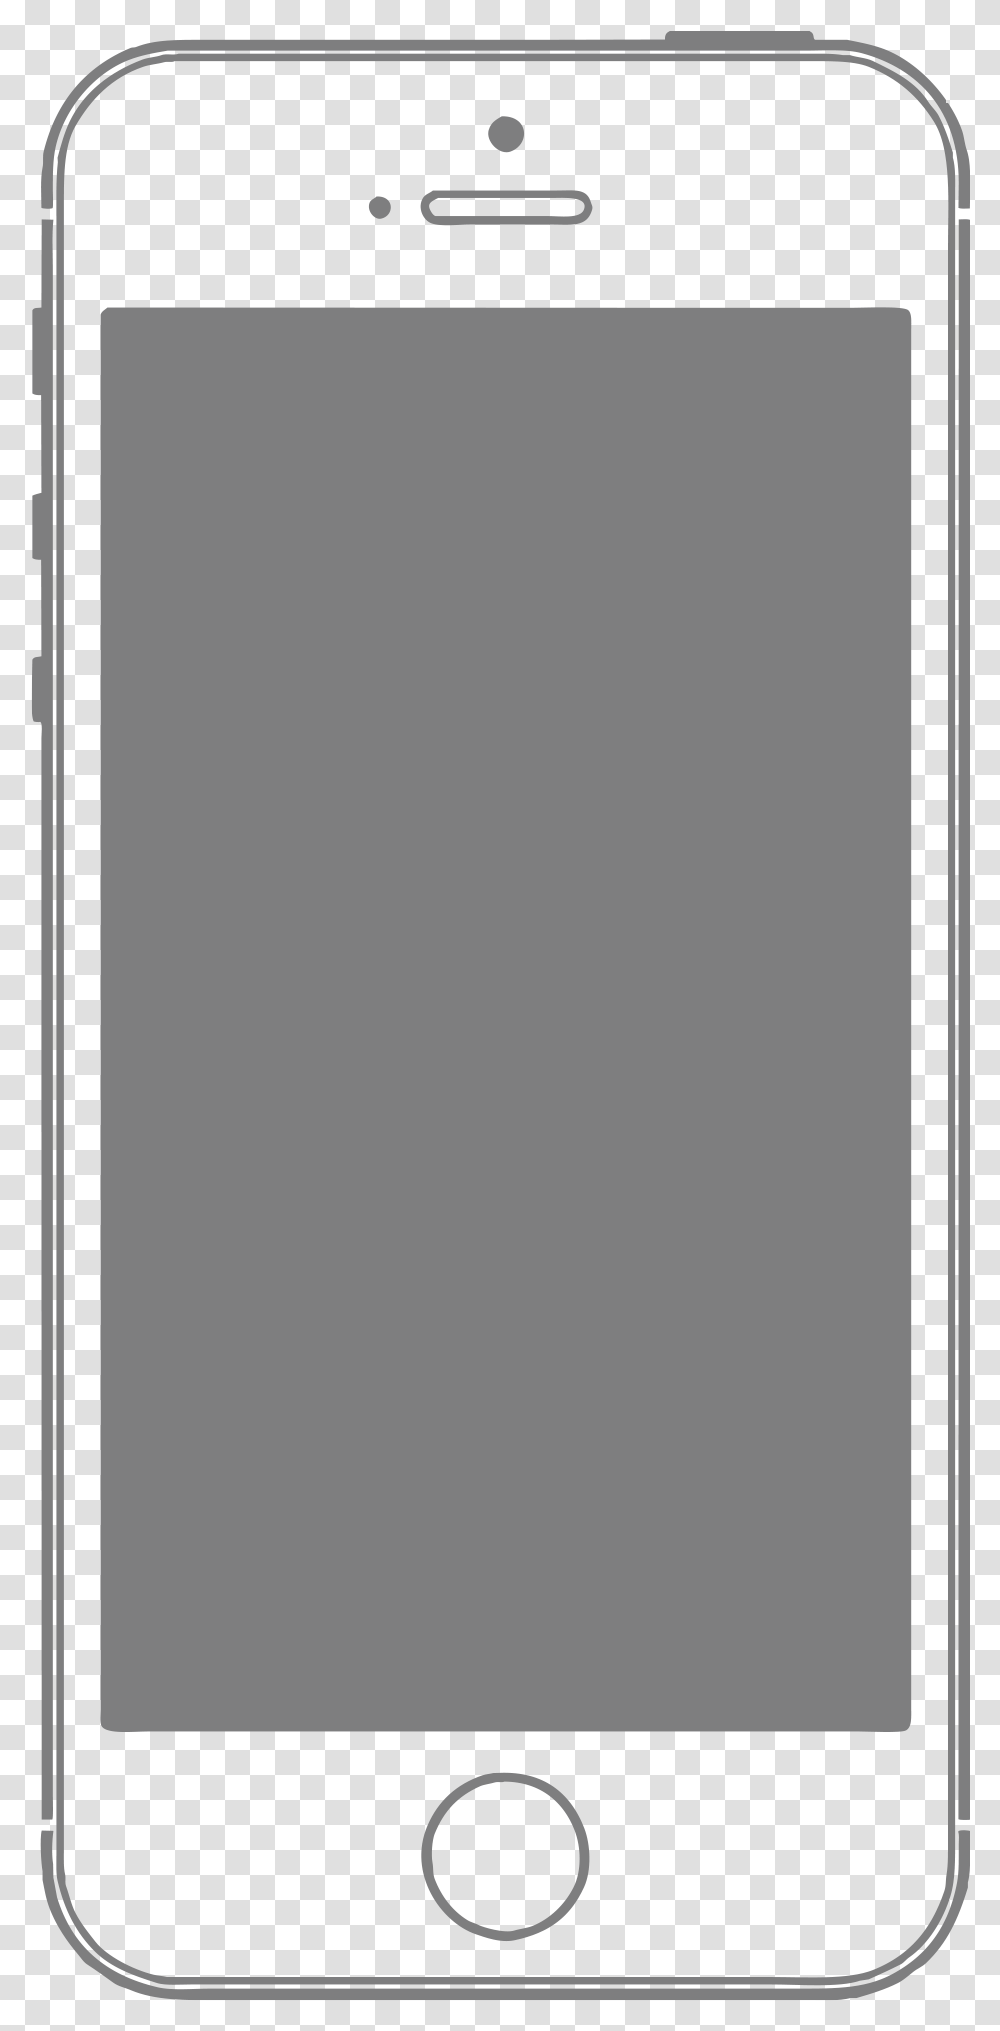 Iphone Images Hd Vector Iphone Mobile, Mobile Phone, Electronics, Cell Phone Transparent Png